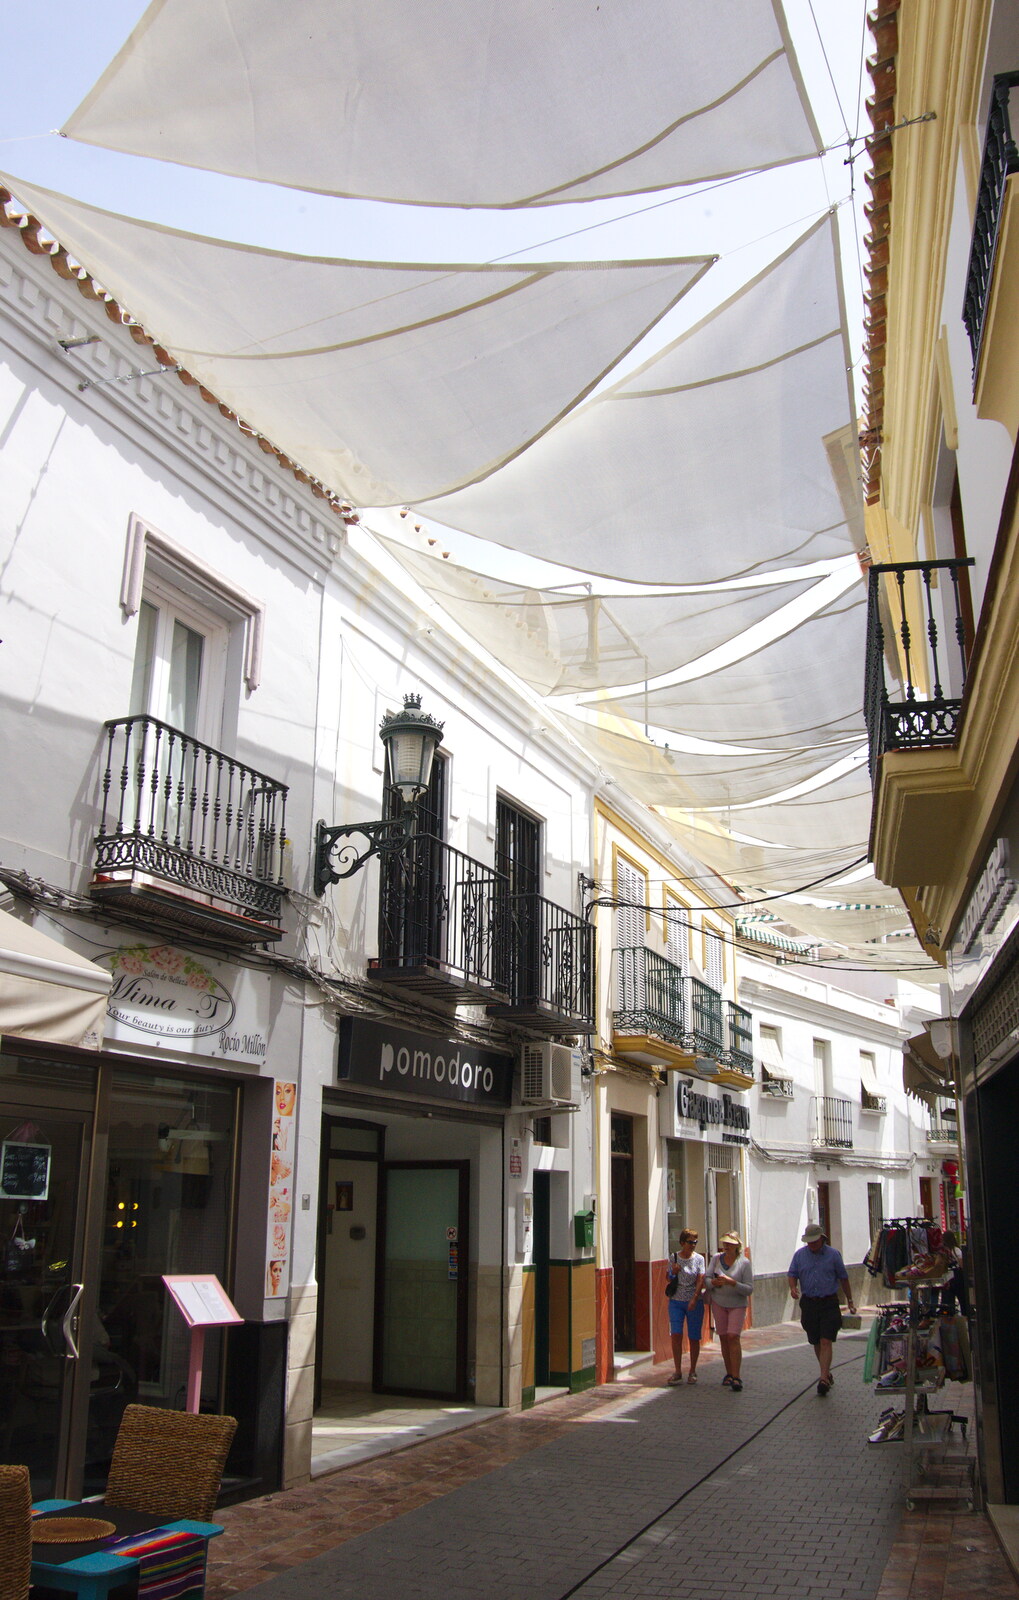 The blind-covered Calle El Barrio from Torrecilla Beach and the Nerja Museum, Andalusia, Spain - 17th April 2019